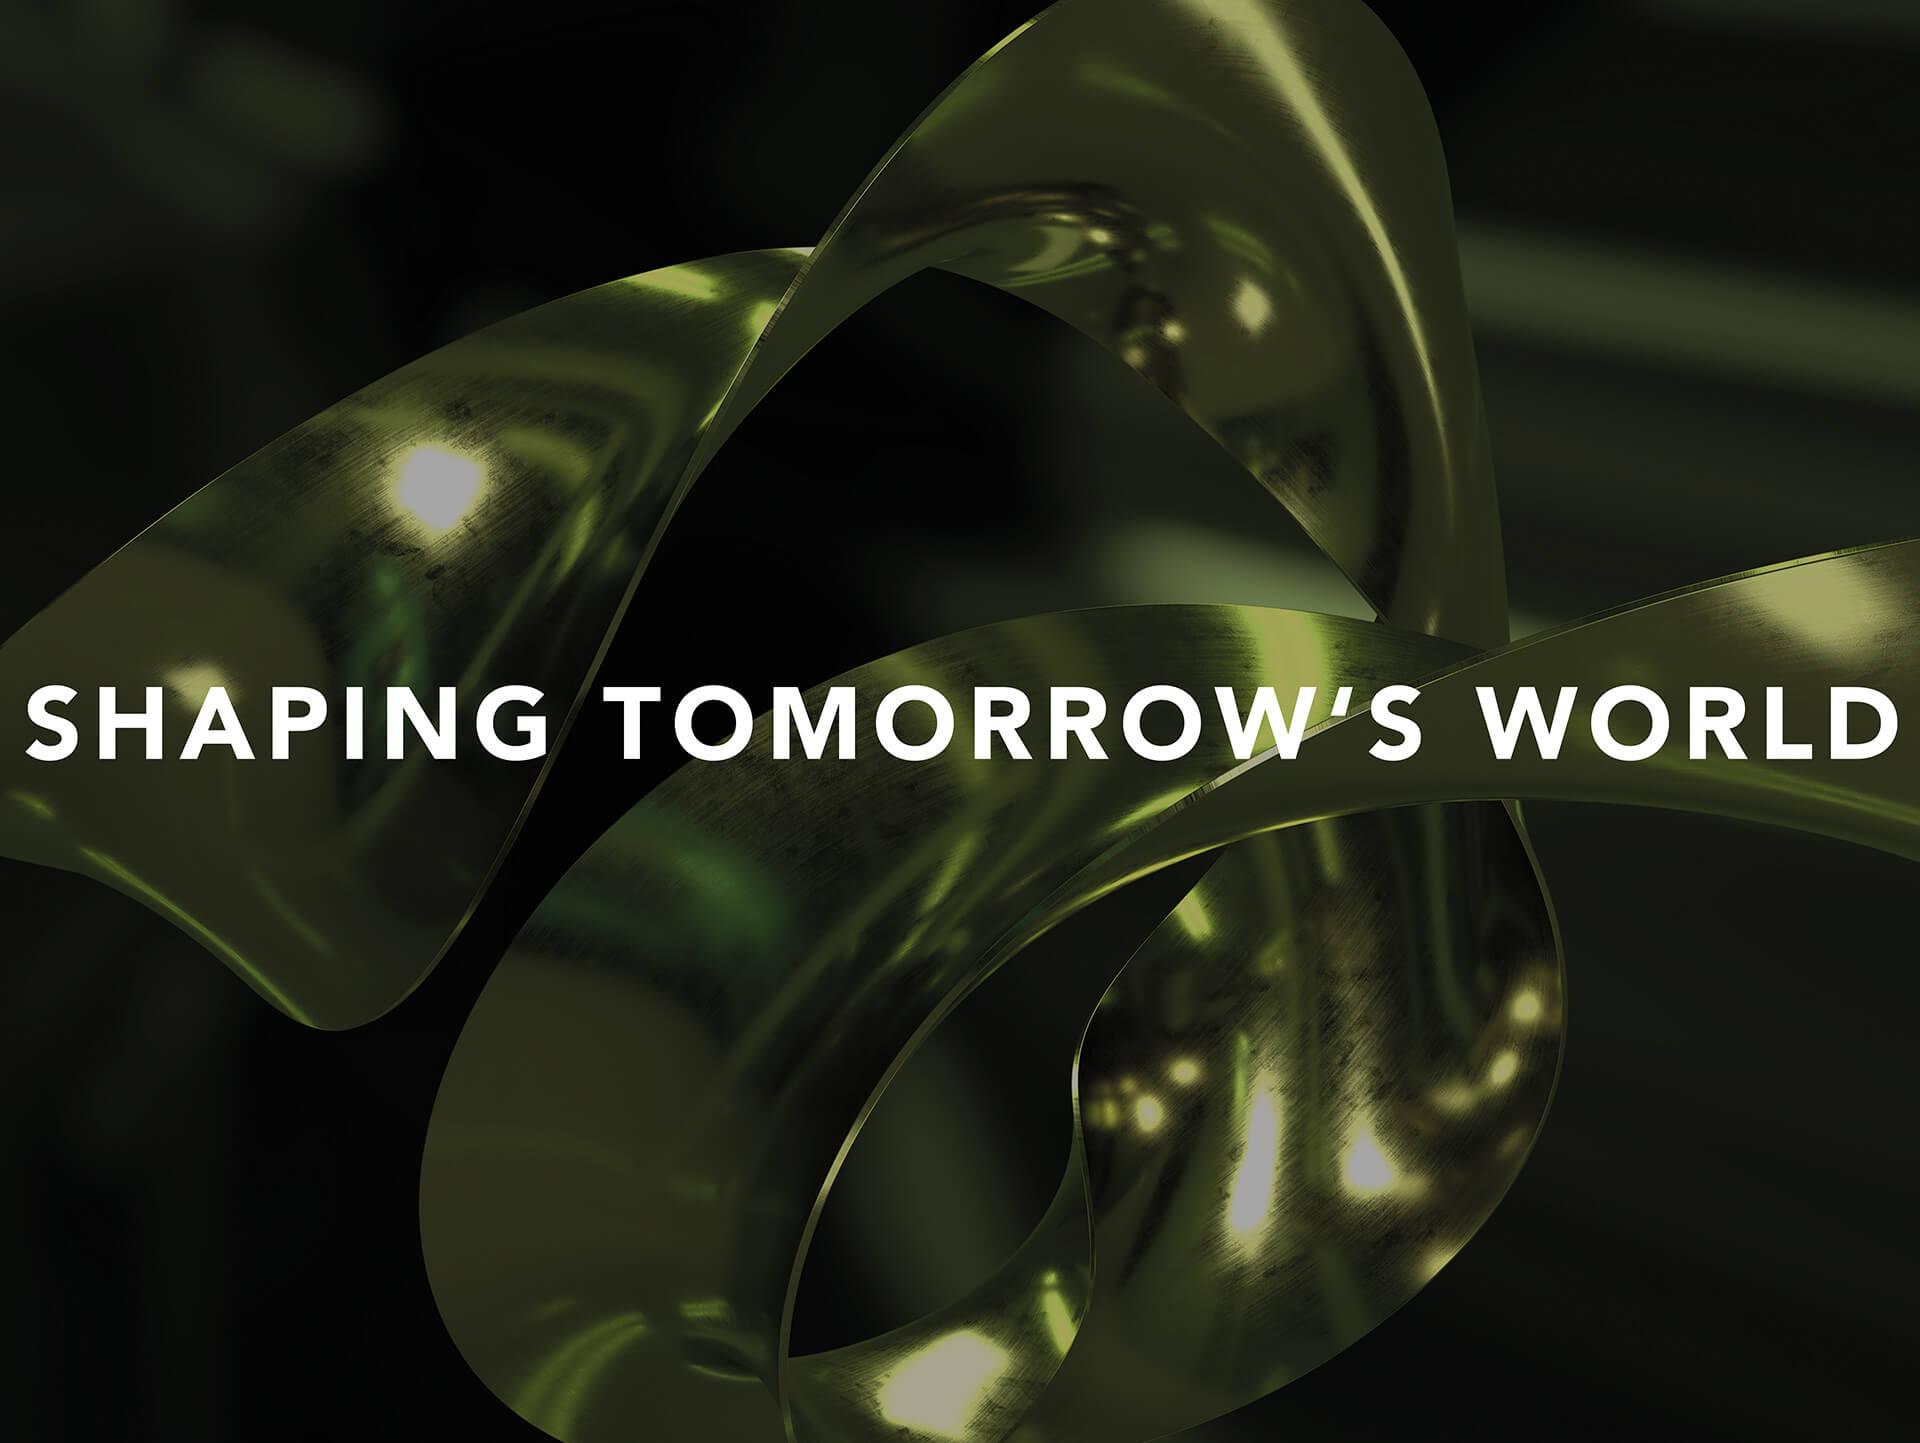 CIDAN are convinced that they will live the brand promise: CIDAN will be “Shaping tomorrow's world